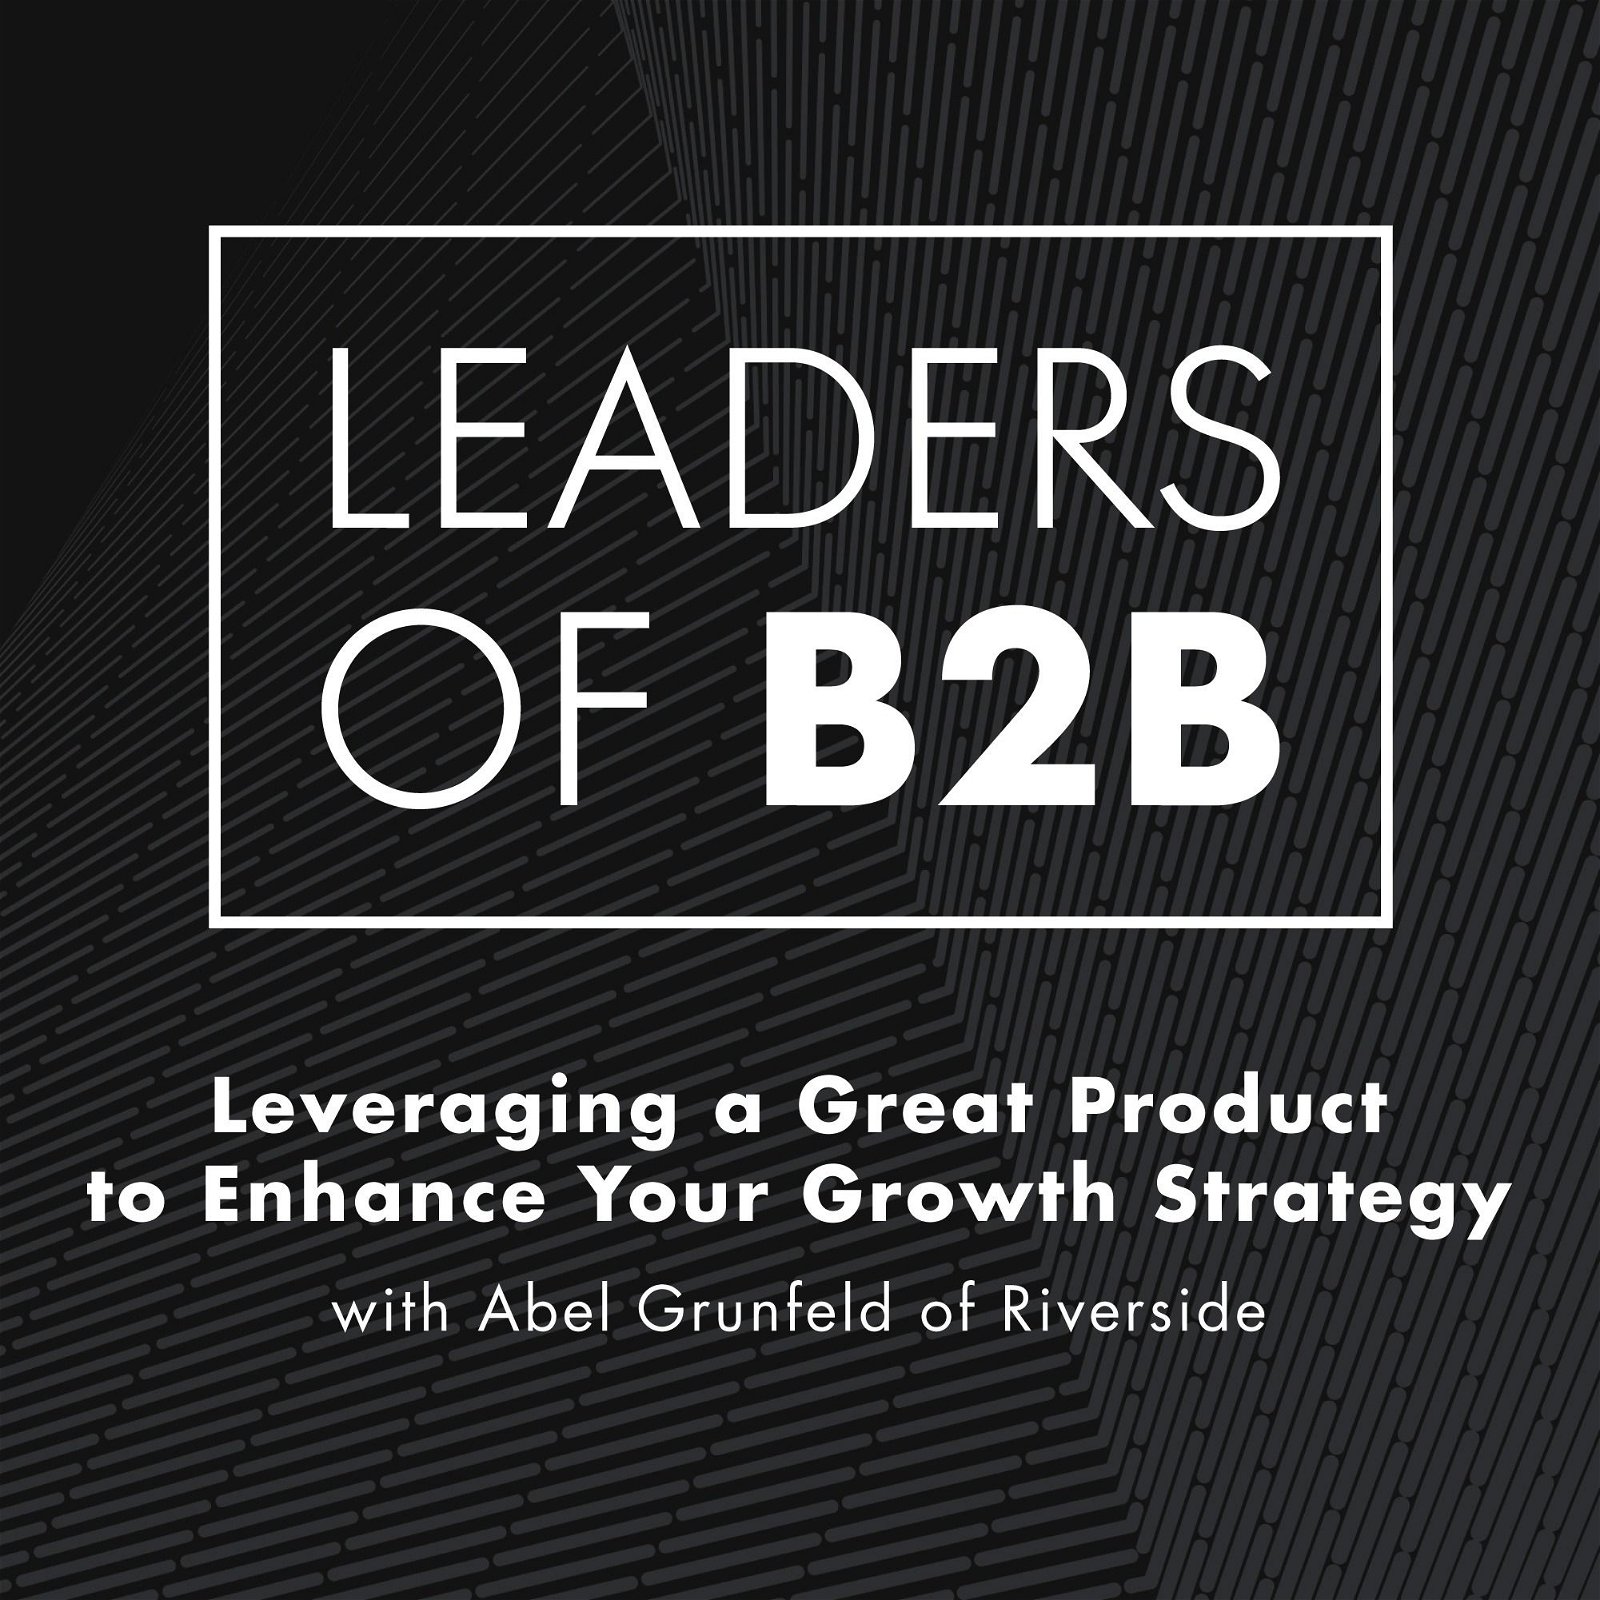 Leveraging a Great Product to Enhance Your Growth Strategy with Abel Grunfeld of Riverside